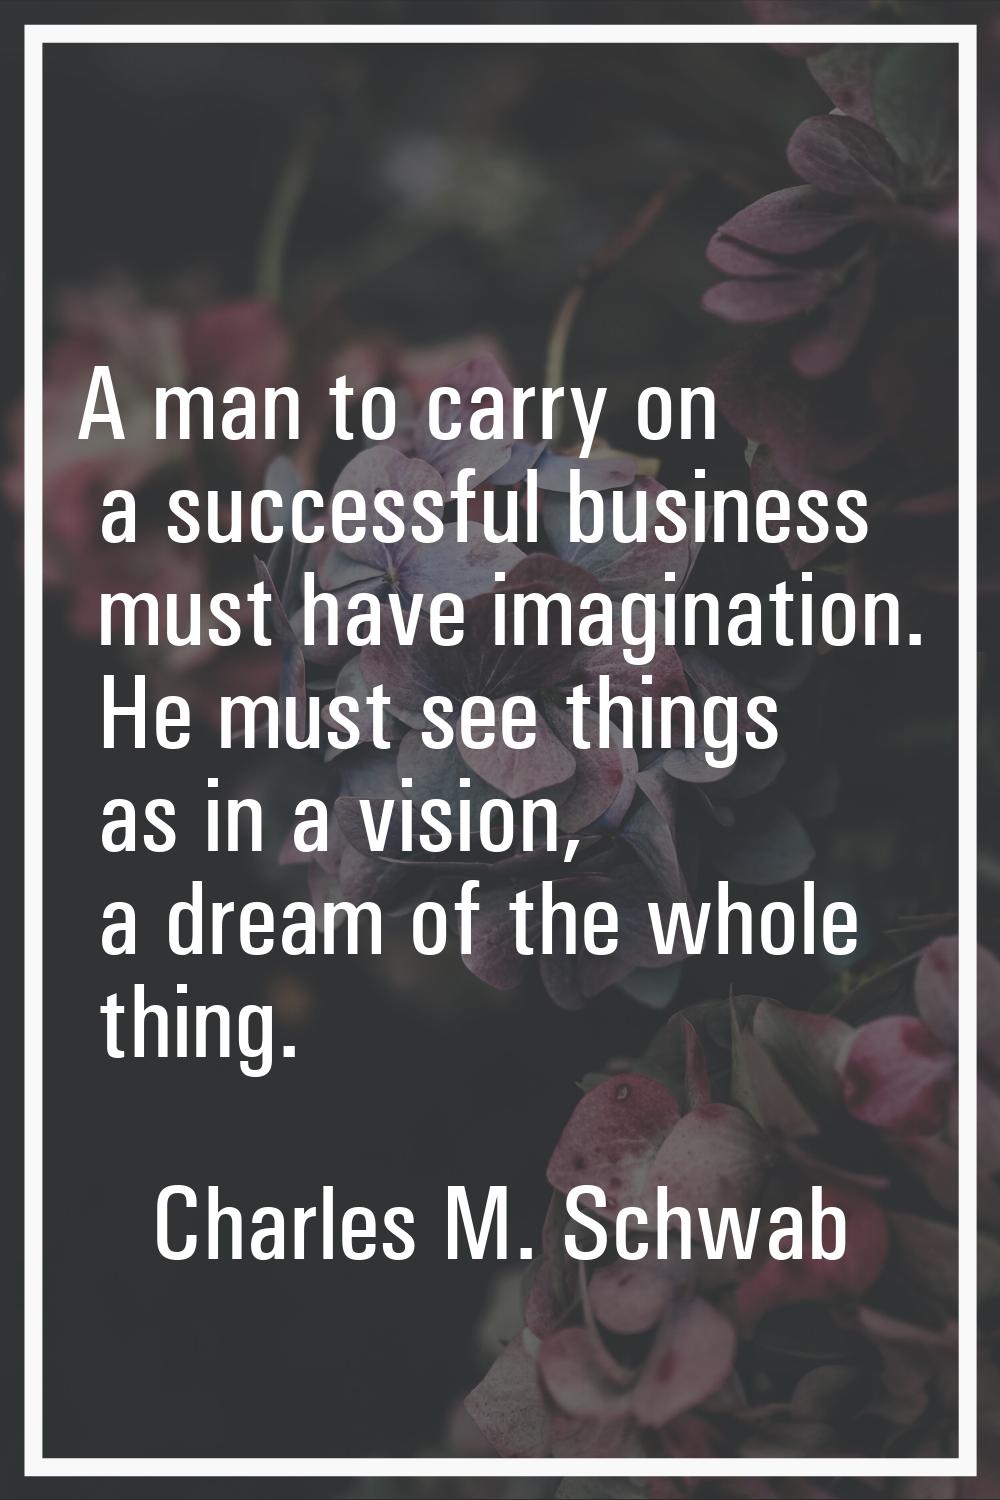 A man to carry on a successful business must have imagination. He must see things as in a vision, a